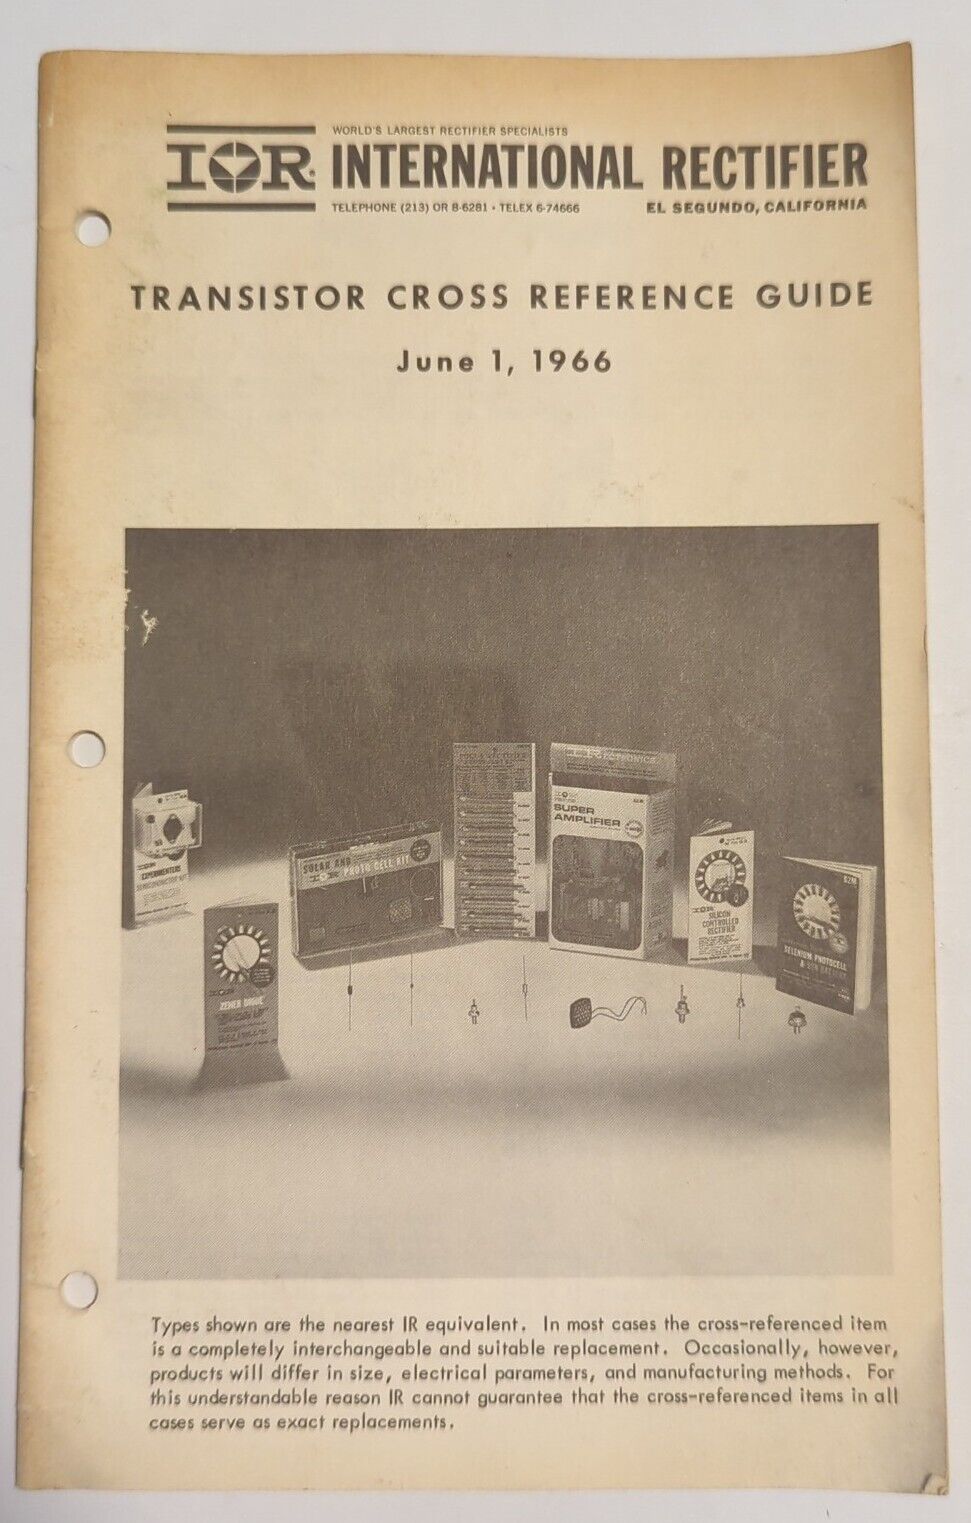 IOR INTERNATIONAL RECTIFIER TRANSISTER CROSS REFERENCE GUIDE 1966